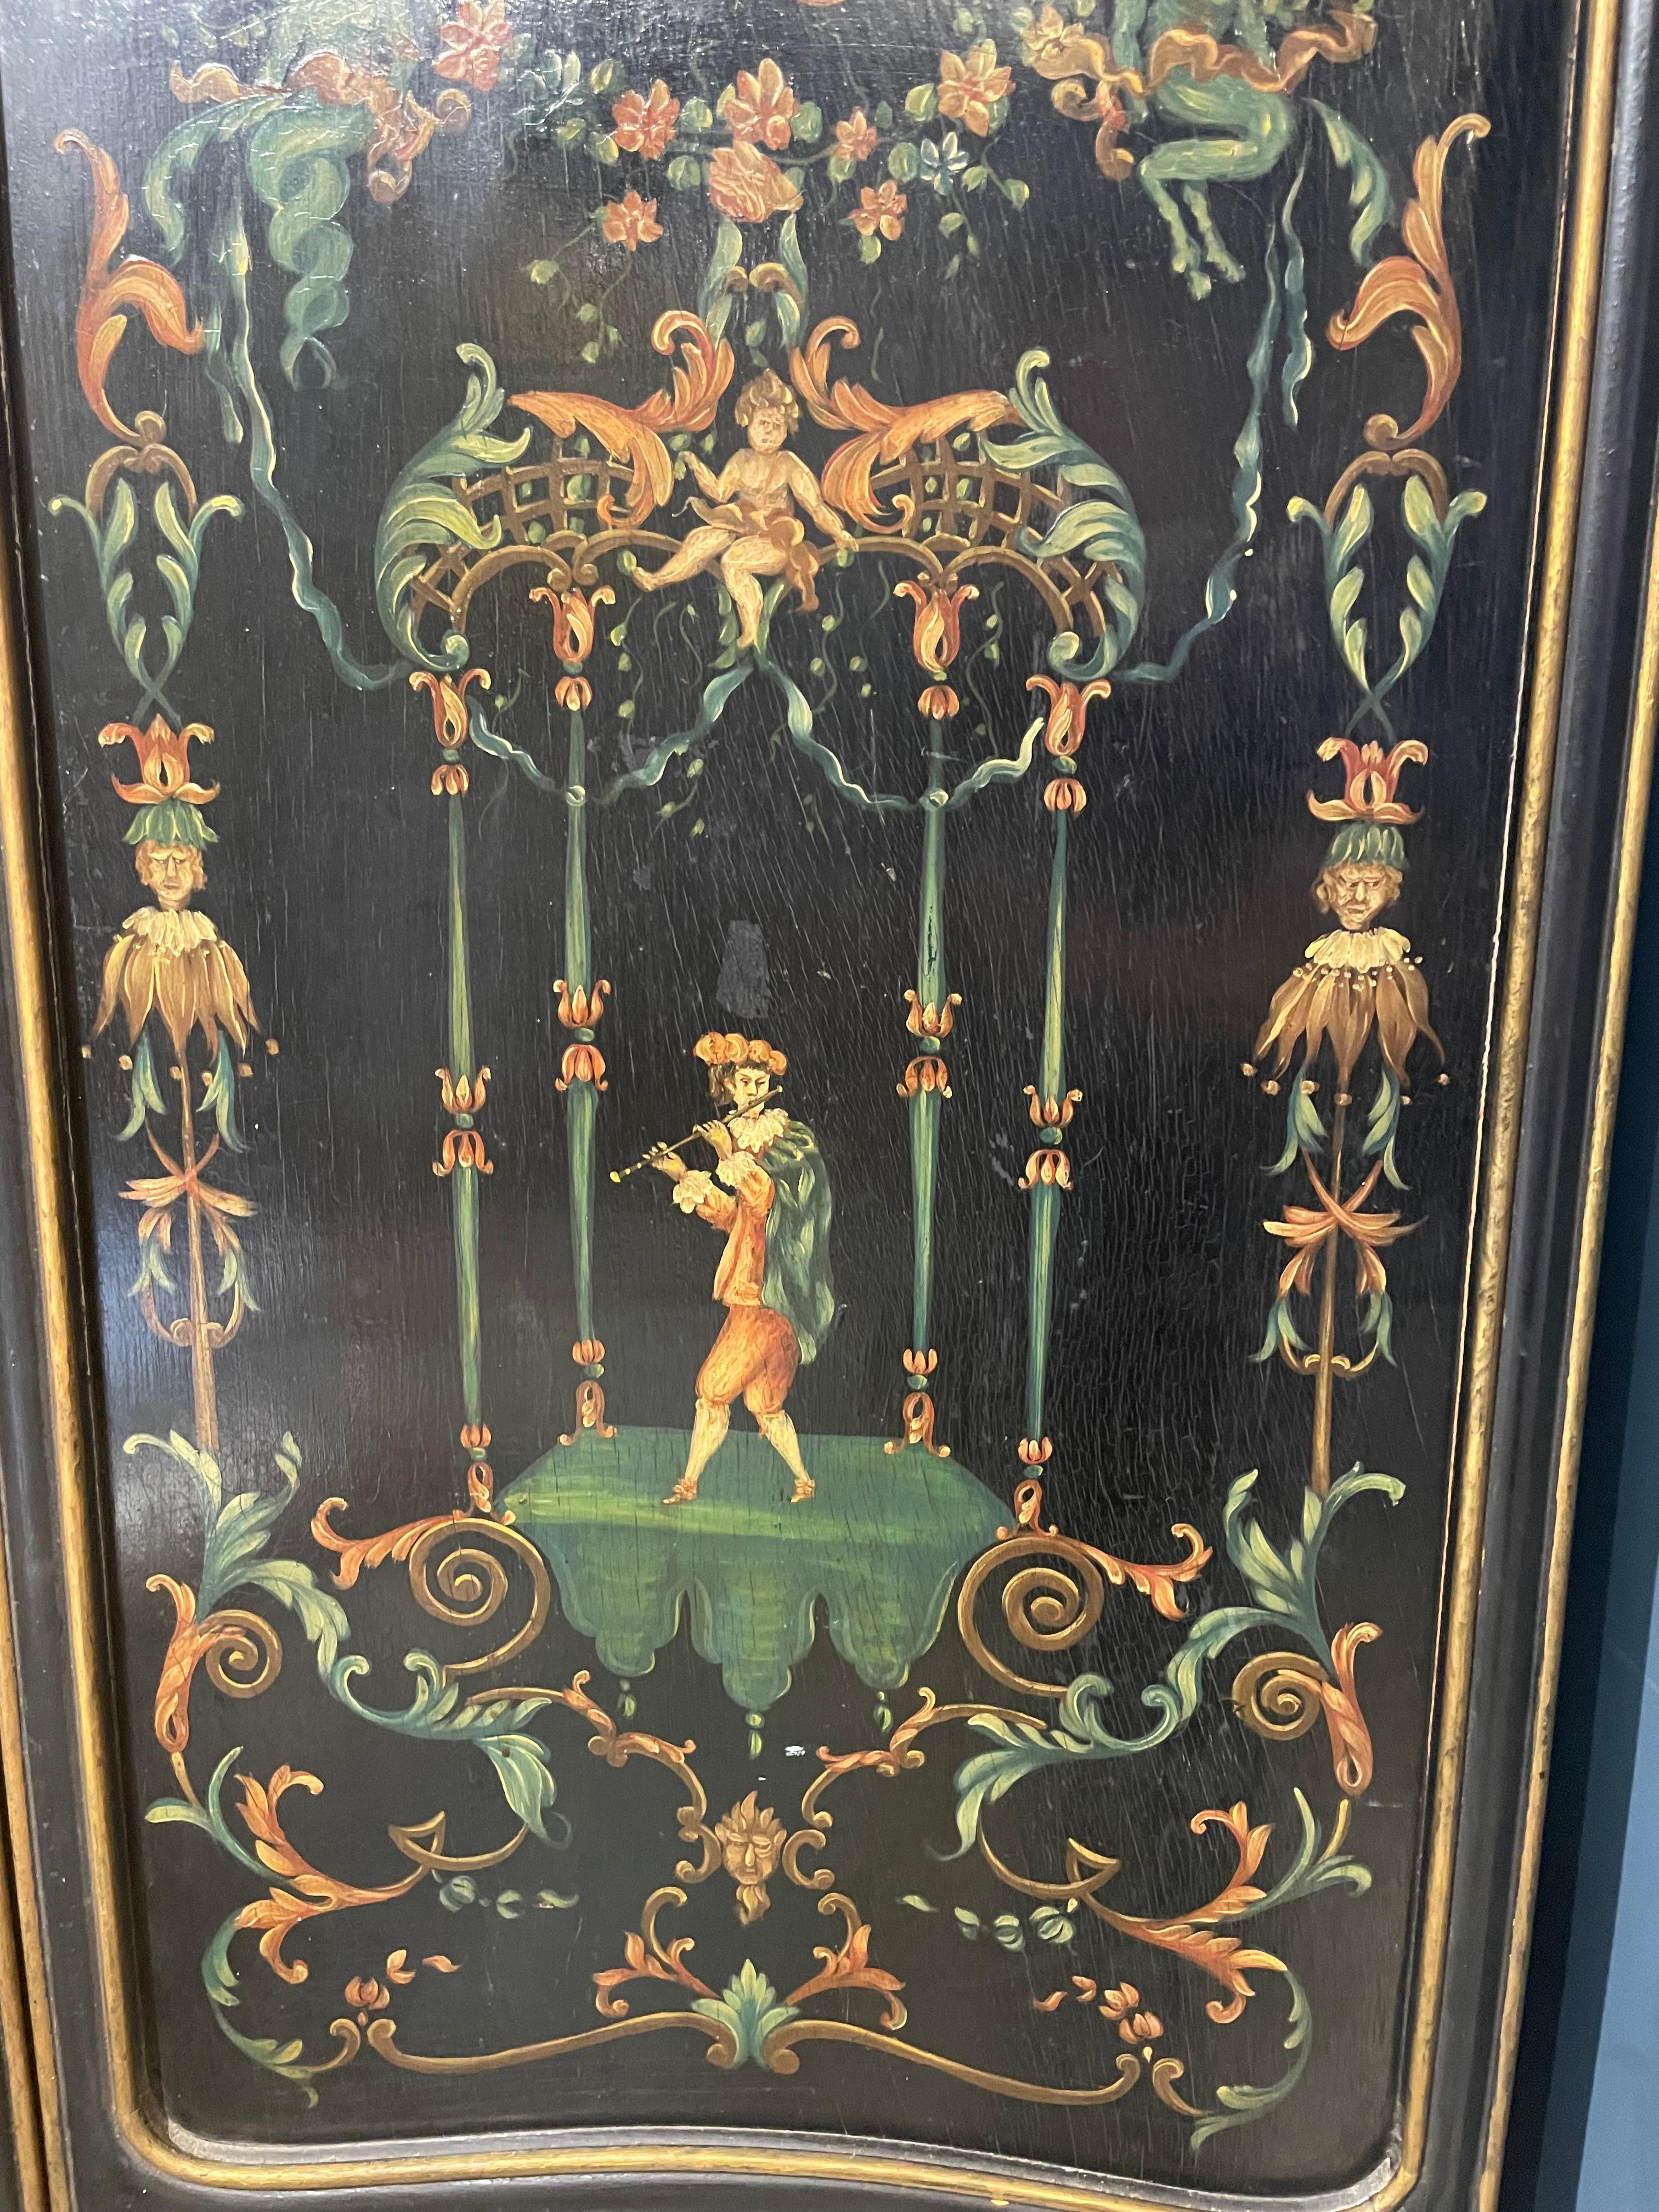 Four screen rectangular paravent. The panels are painted on wood . The upper part is in the shape of a gendarme’s hat.
Each panel is richly painted with floral decor, galantes, costumed characters, babys and mythological characters. The abundant